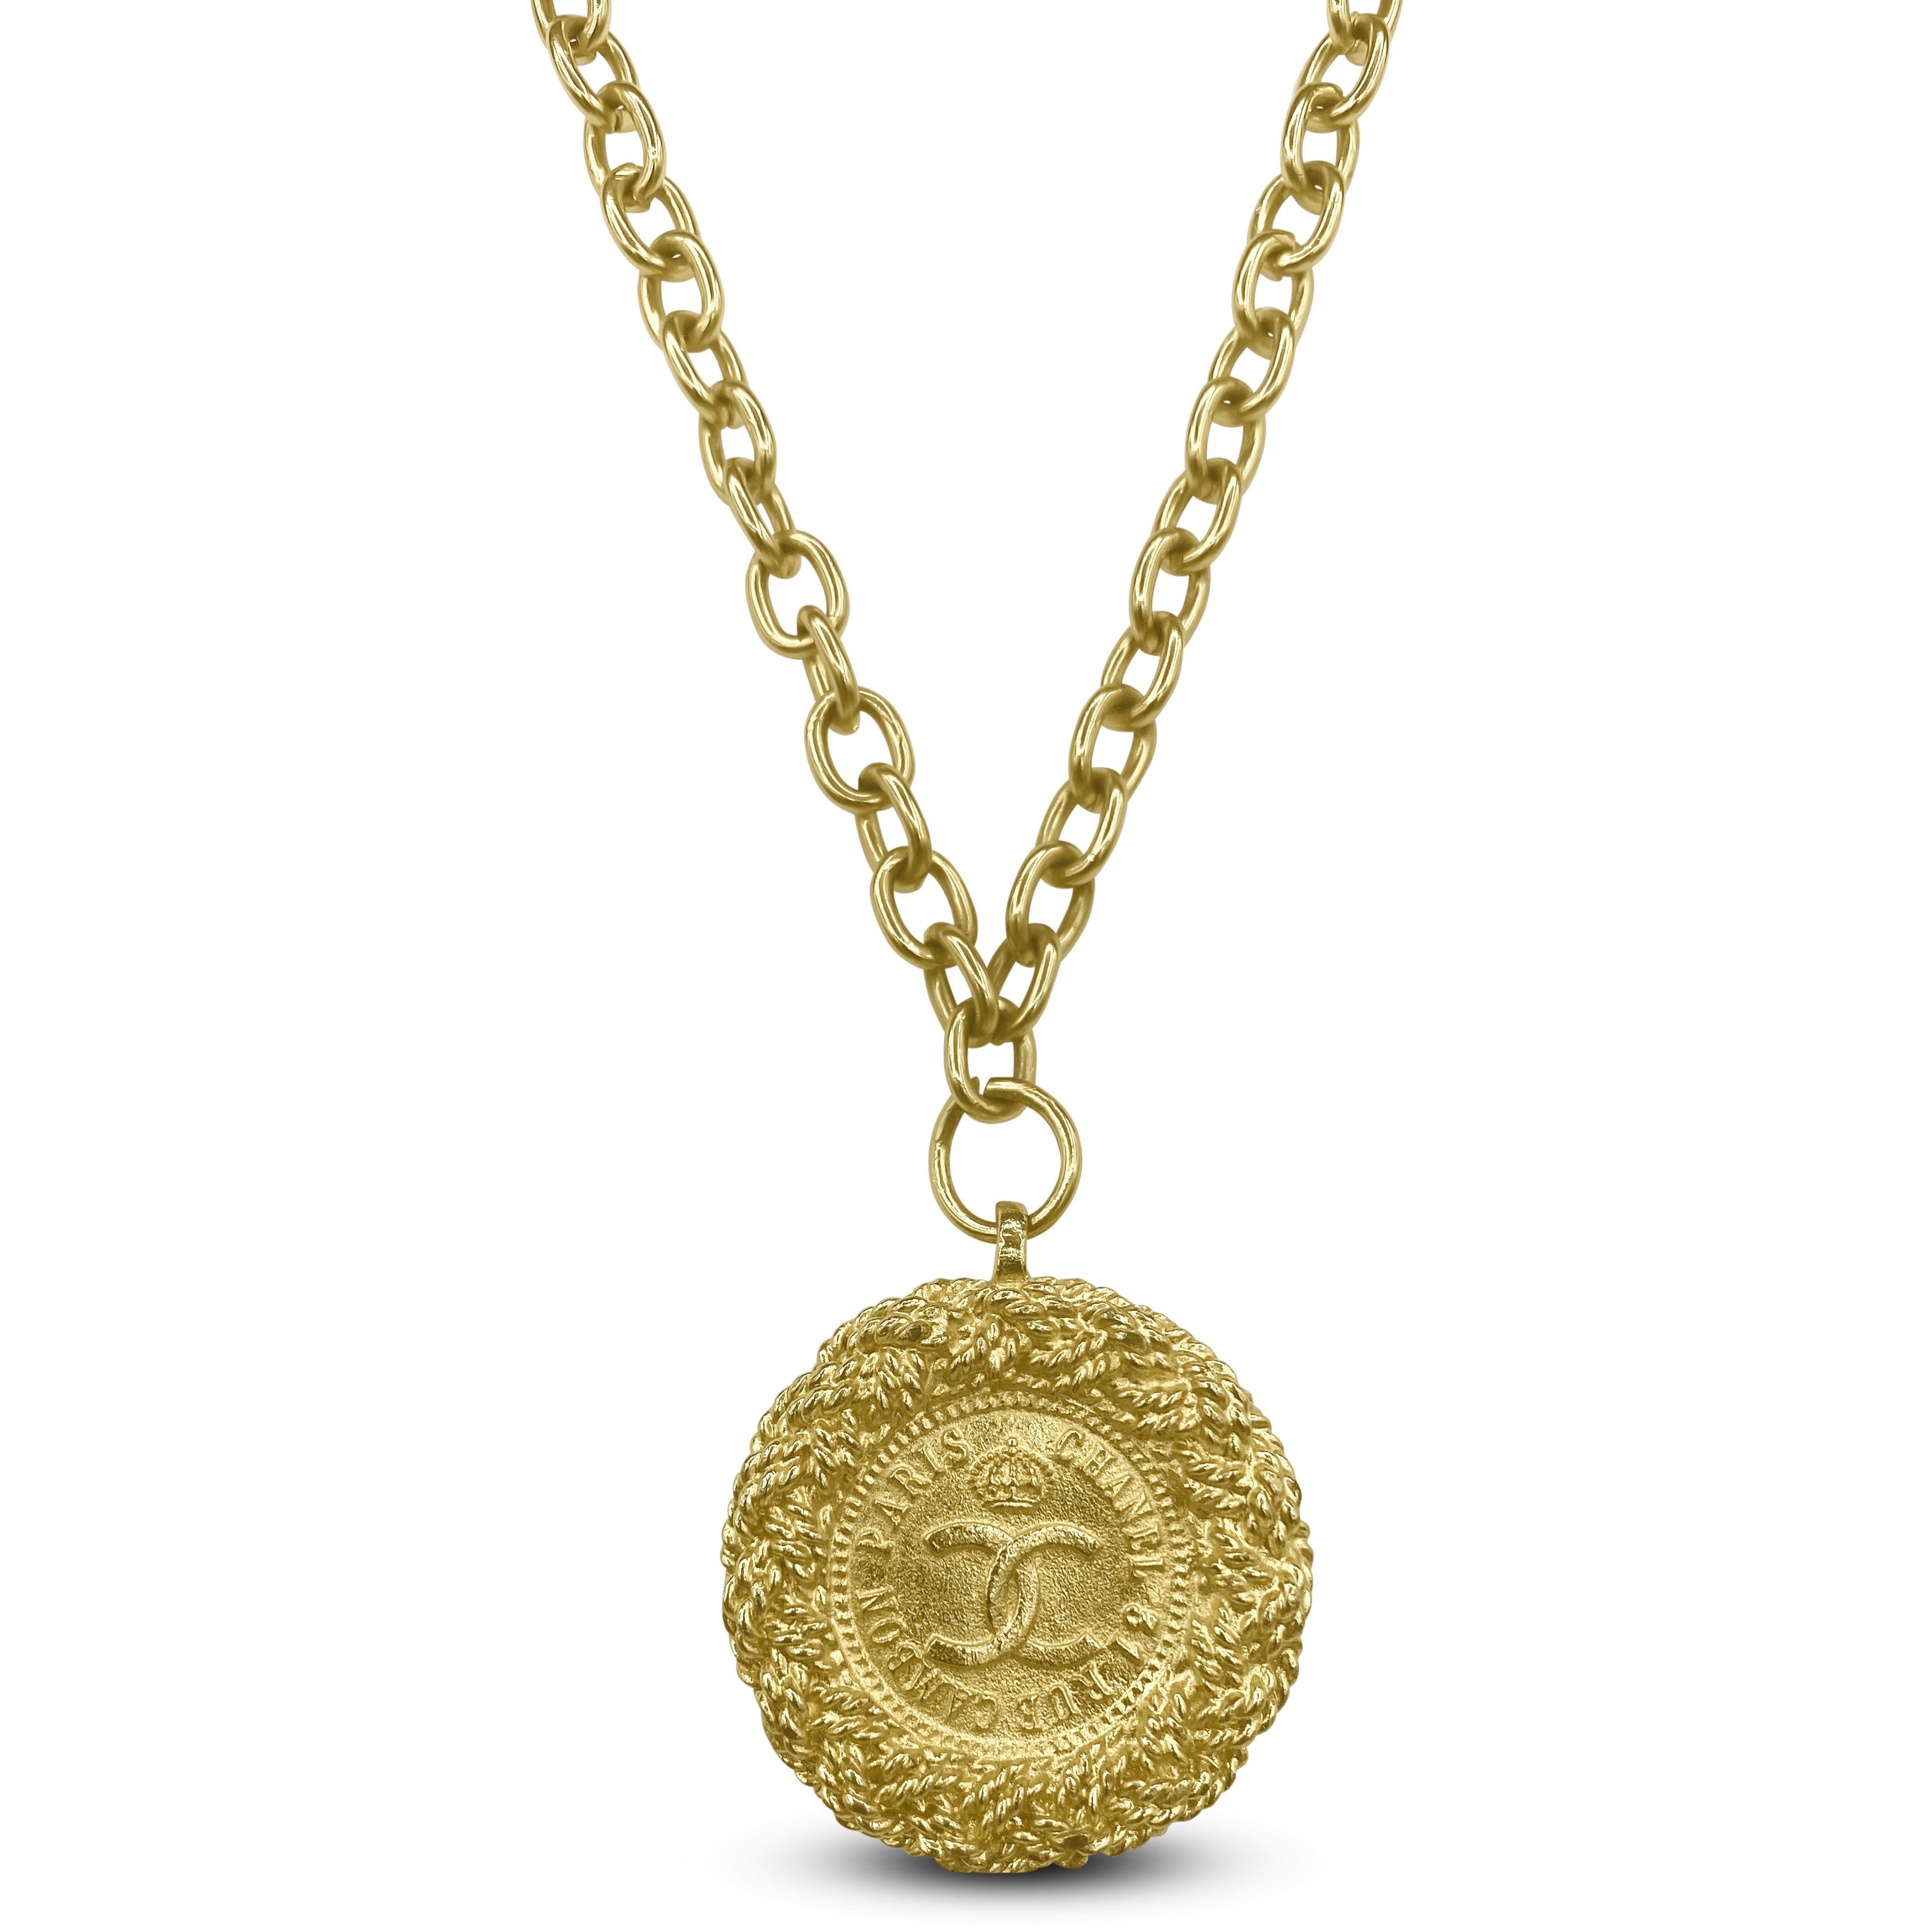 Buy Rare Chanel Button Pendant Designer Jewelry Necklace Charm Brutalist  Gold Coin Pendant CC Handmade 80's Online in India - Etsy